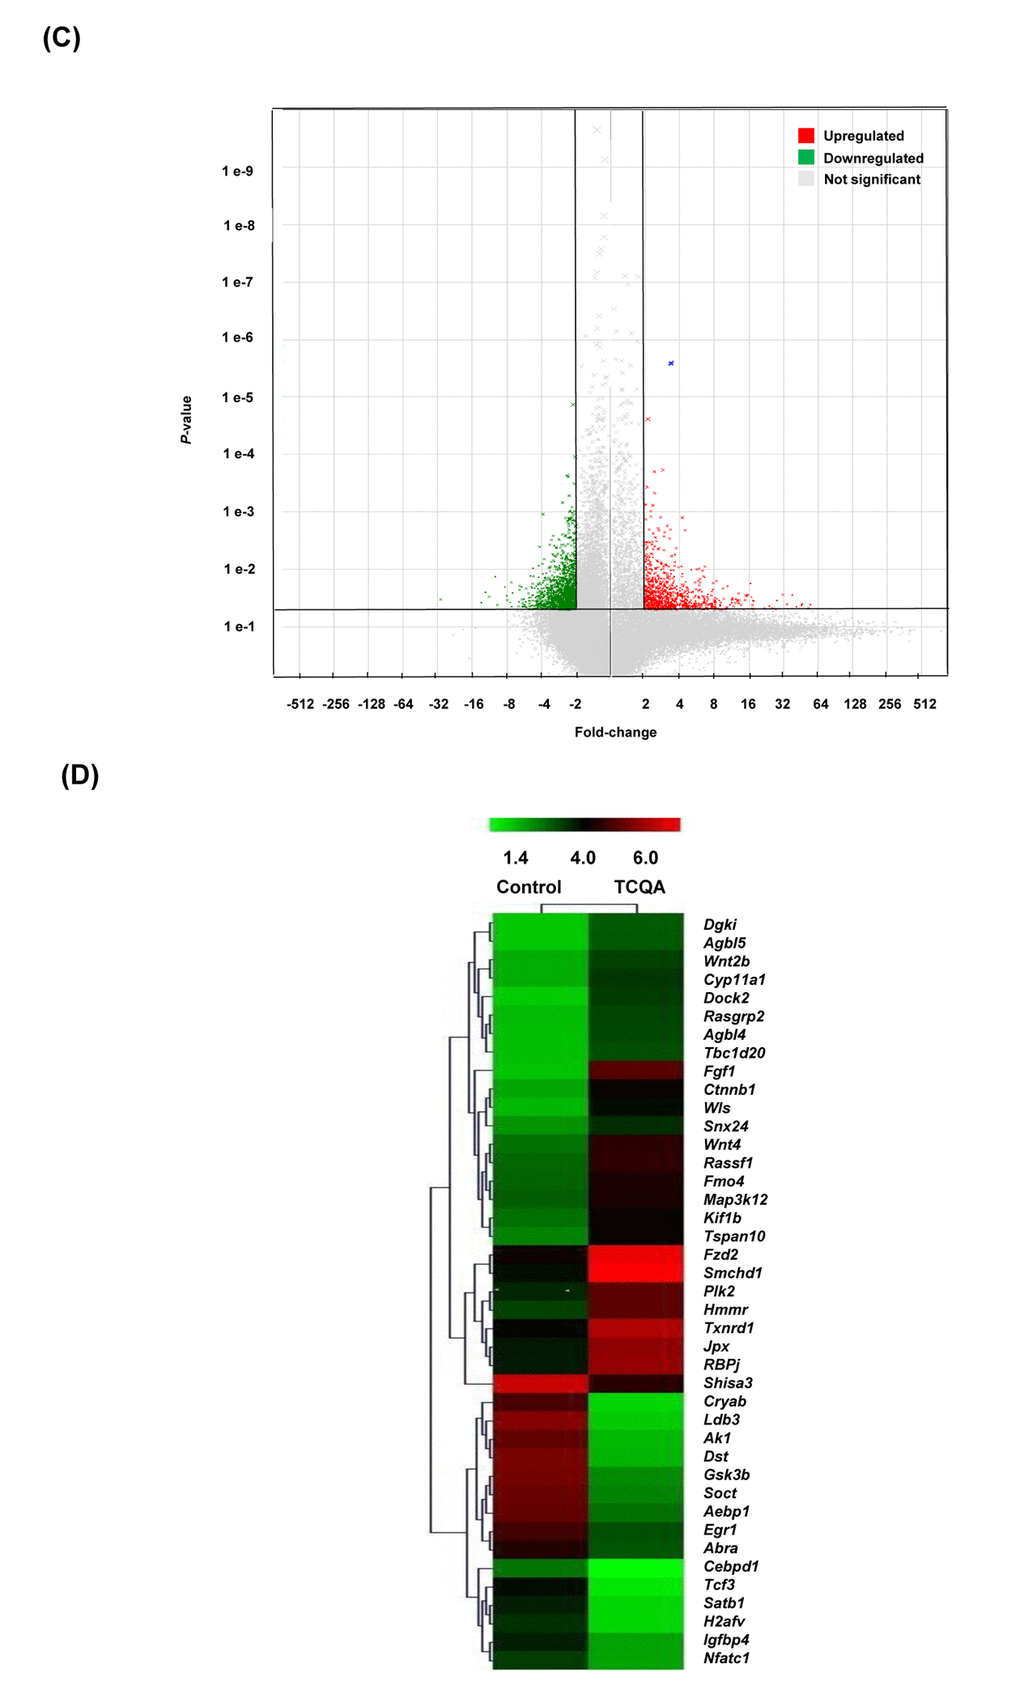  Transcriptome changes induced by TCQA, 1235 genes were significantly selected: 435 were upregulated and 800 downregulated. (C) Hierarchical clustering of the genes altered after treatment with TCQA using Euclidean distance and average linkage algorithm of the TIGR Mev version 3.0.3 software (The Institute for Genomic Research, MD, USA). Horizontal stripes represent genes and columns represent control and TCQA. The significant fold change in gene expression is 2-fold change (control vs TCQA). (D) The volcano plot represents the regulated genes between the control and TCQA. The red color represents the upregulated genes, the green color the downregulated genes, and the grey color the unregulated genes. The expression of the genes above or below, left or right, the lines differed more than 2-fold change between the control and TCQA group.